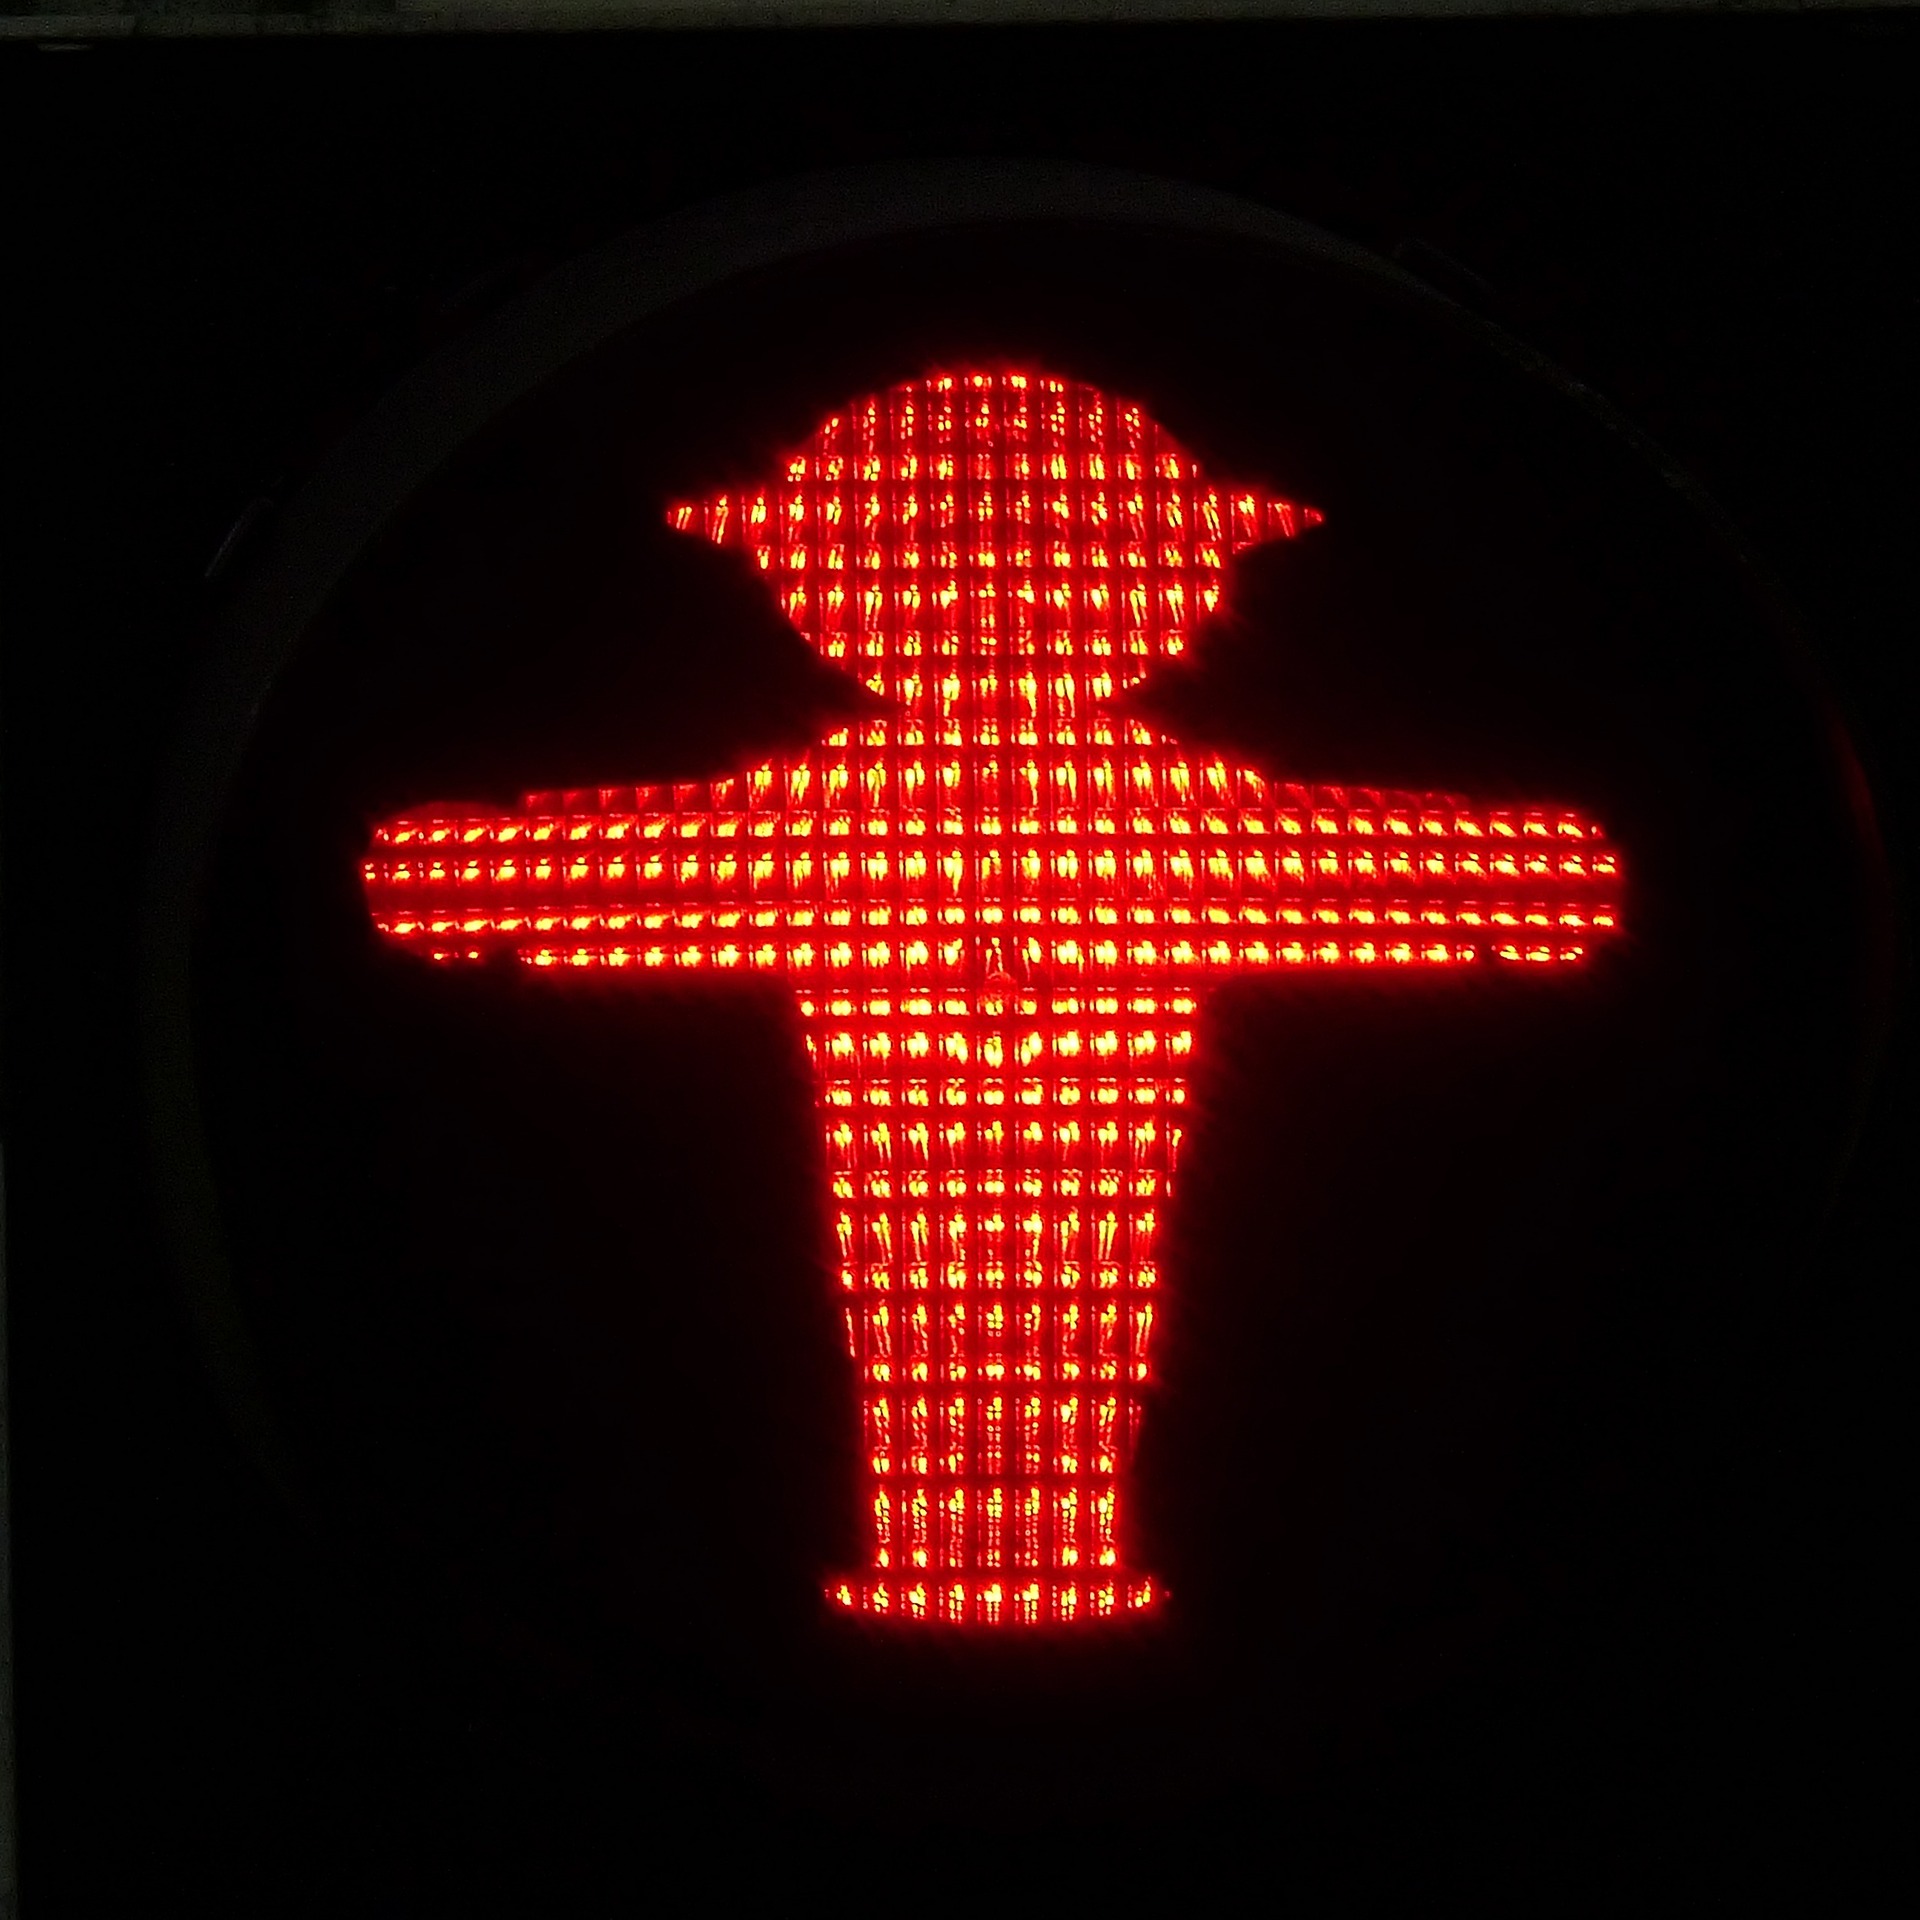 Ampelmann (red little man that is used for crossing lights in Berlin)